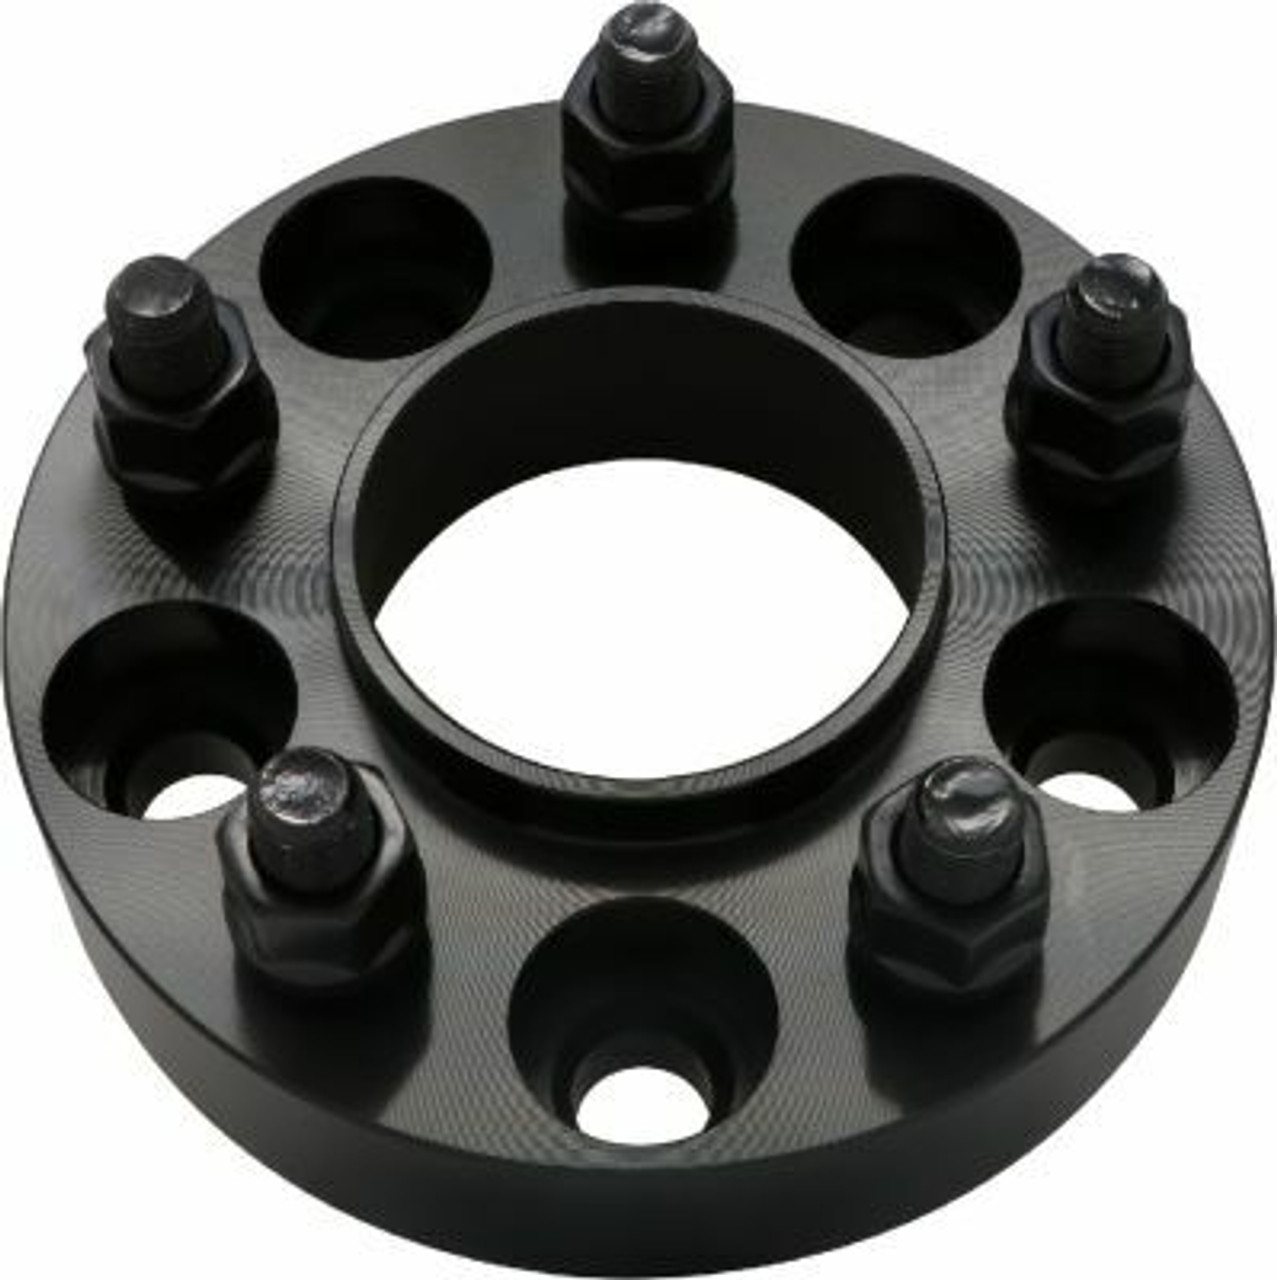 5x4.50 to 5x4.50 Wheel Adapter - 1/2" / 1.25" Thick / 70.5mm CB / 70.5mm WB